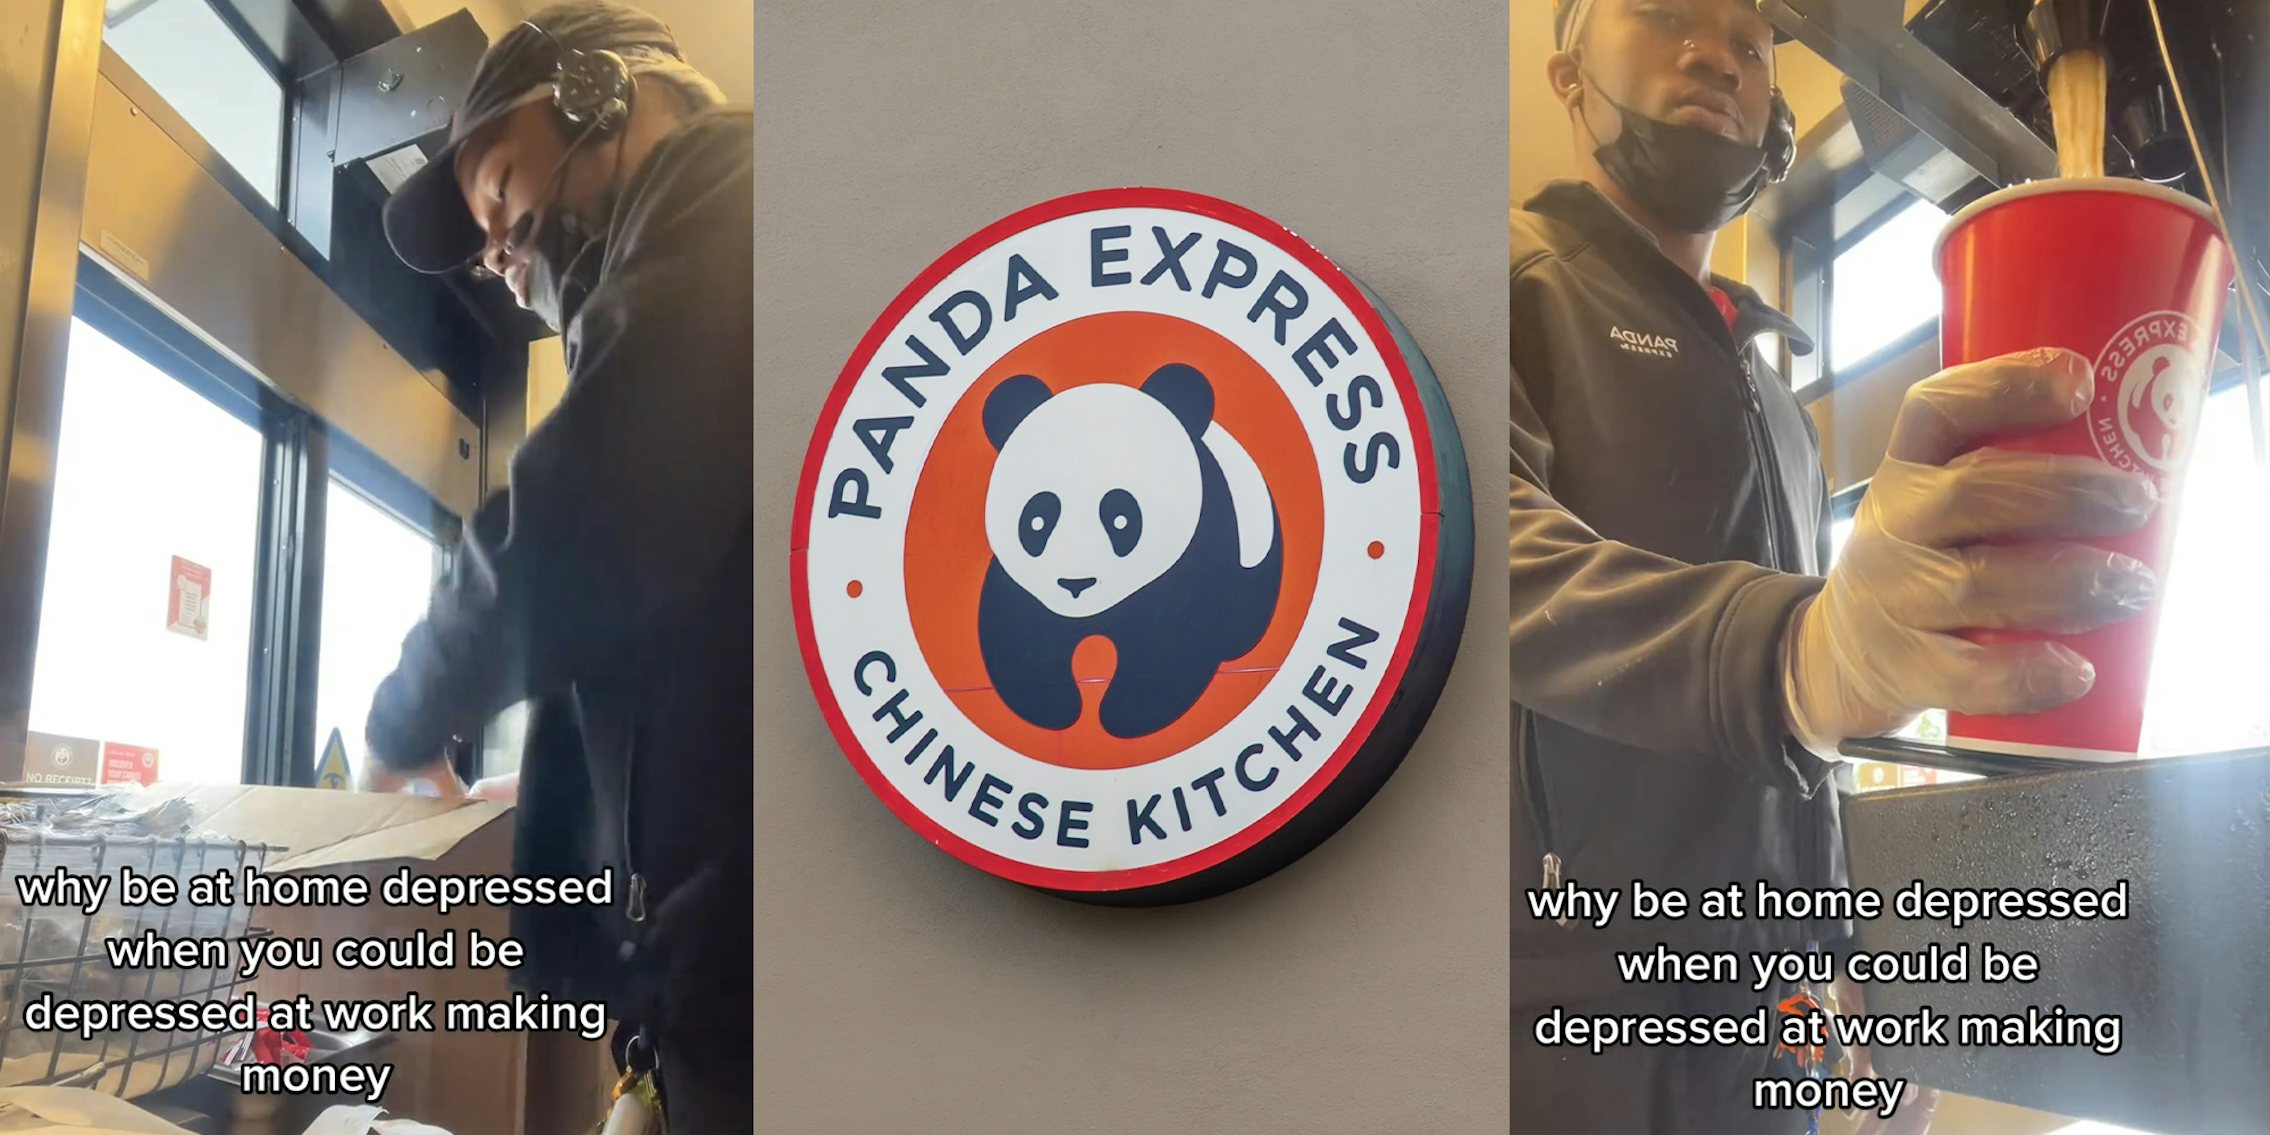 Panda Express worker shares how he prefers to be depressed at work than at home.